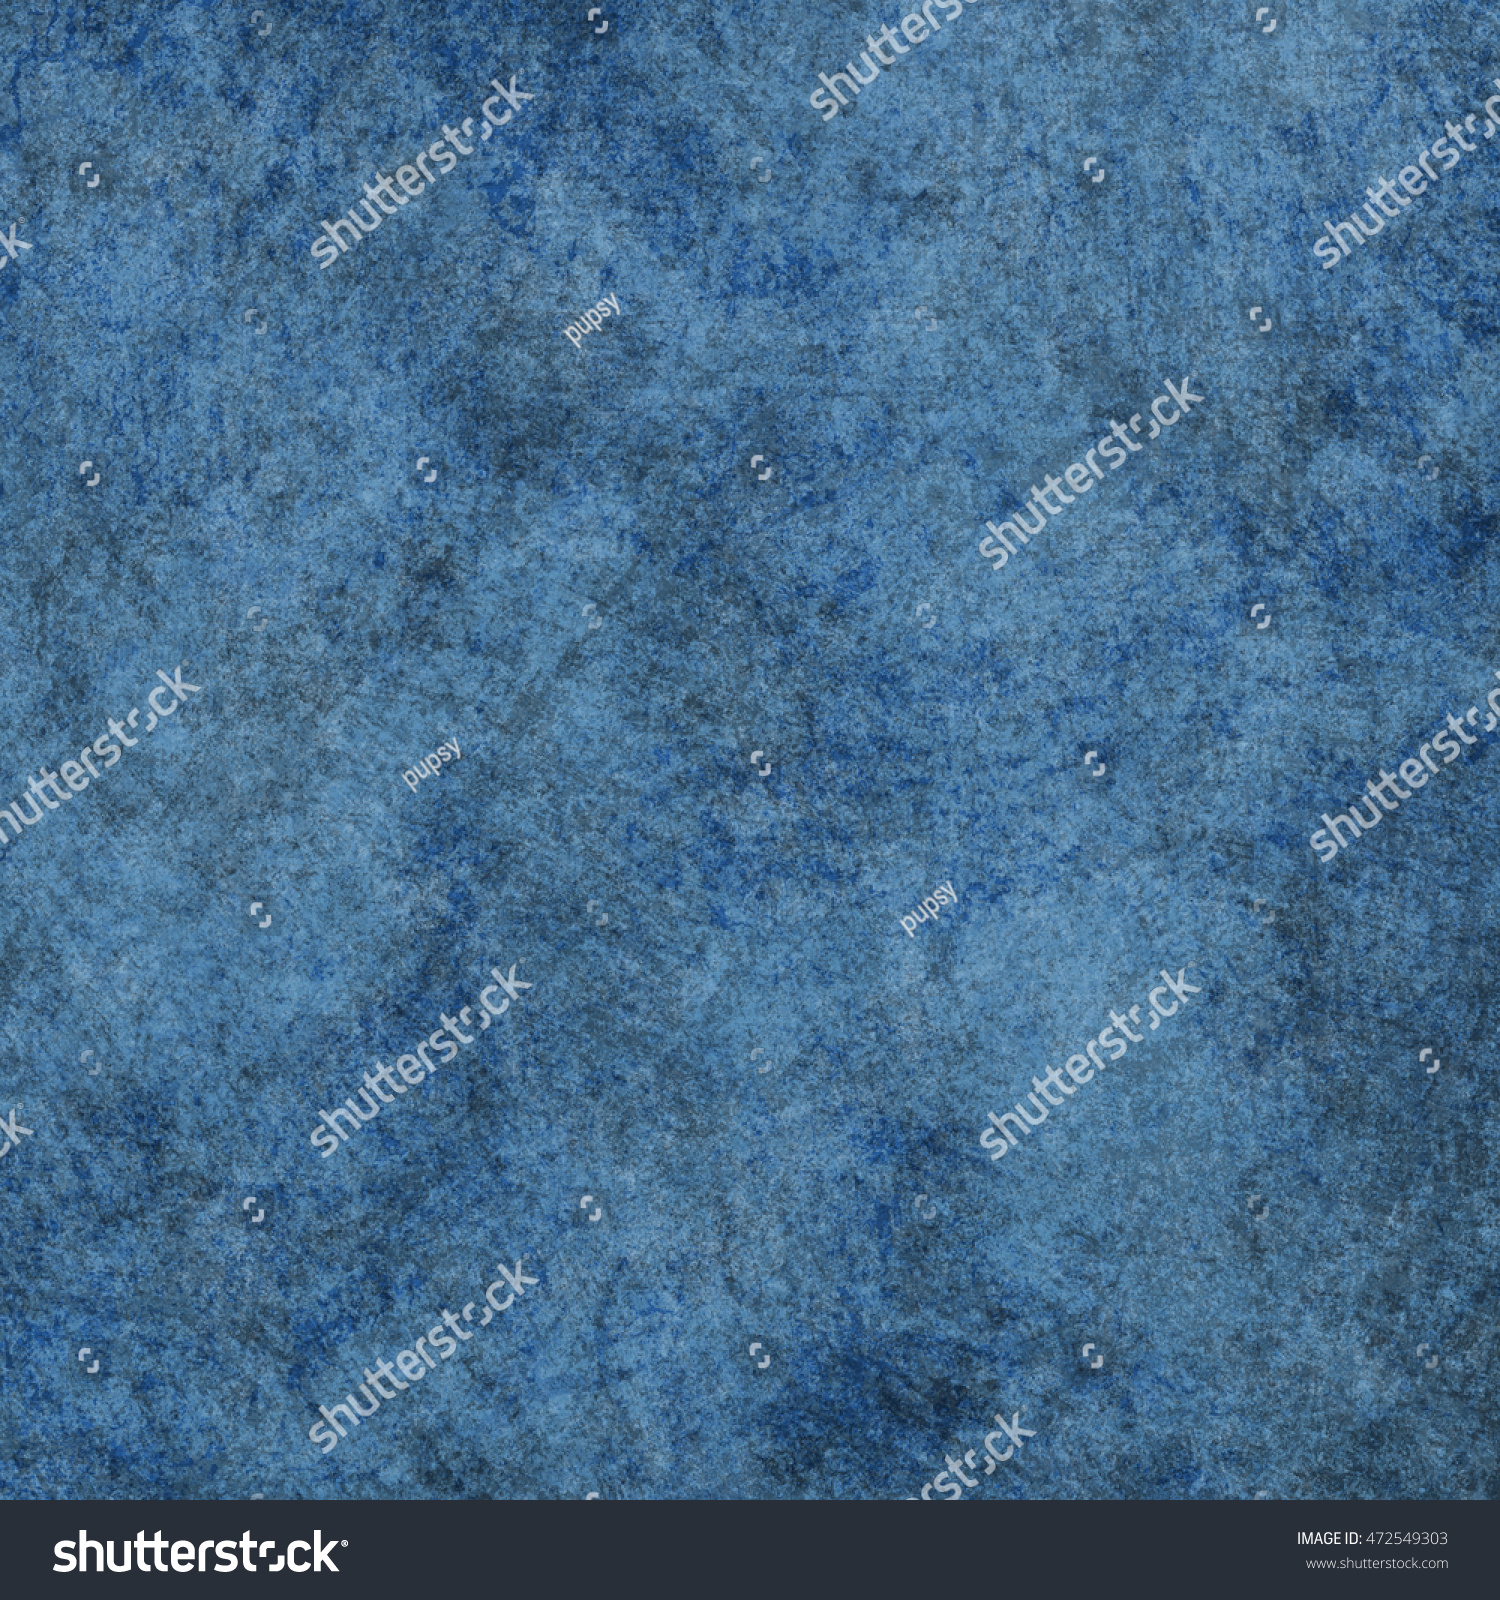 Blue abstract grunge background #472549303